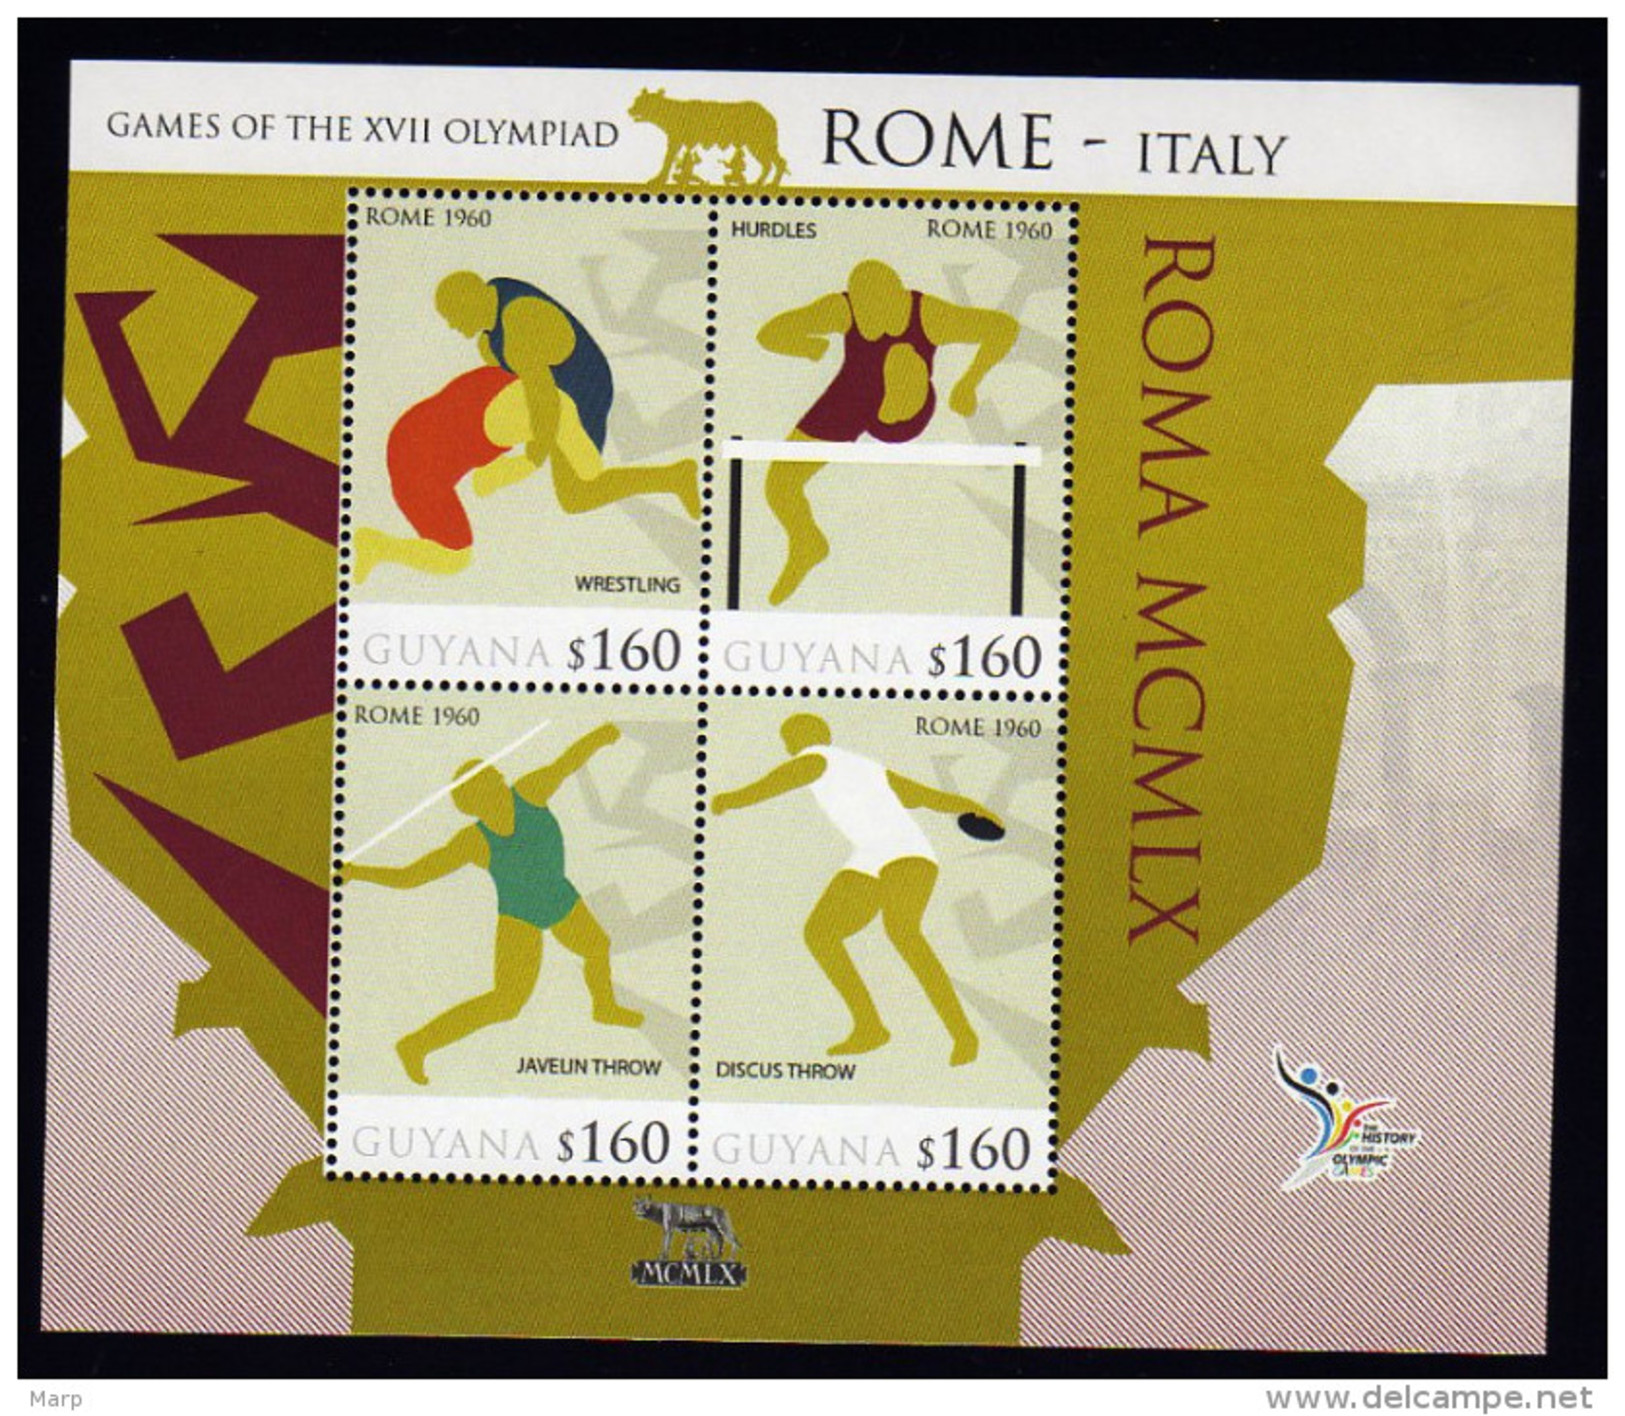 Guyana S/Sheet Mnh History Olympic Games Rome 1960 Wrestling/Hurdles/Discus And Others - Summer 1960: Rome